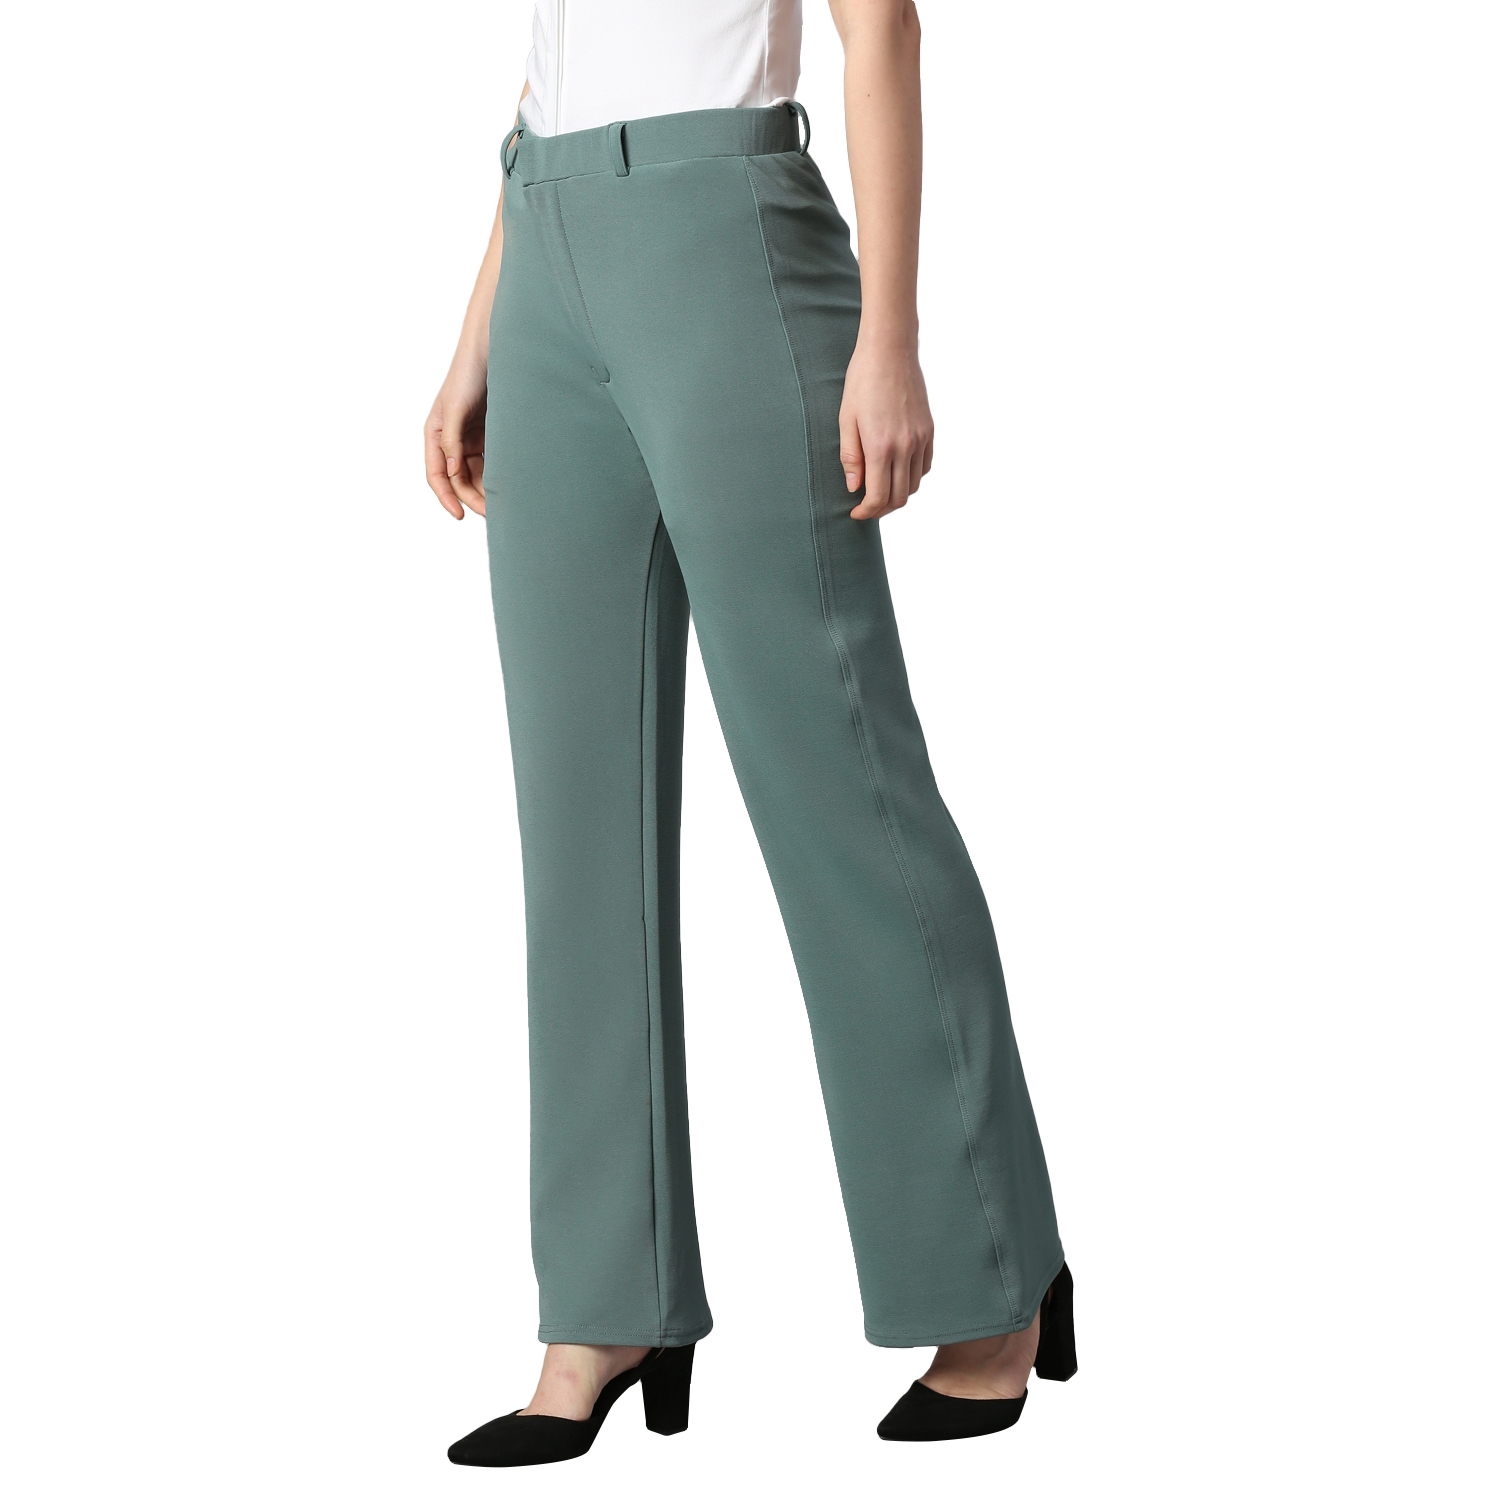 Cotton Lycra Mint Trouser For Women's.Ladies Casual Trouser,Track Pant,Girls  stylish Trouser Pant.Elastic Staright Pants, for Casual Office Work  wear.Slim Fit Formal Trousers/Pant.formal Trouser For Womens.Womens Trousers  Cotton Pant.Formal Tousers For